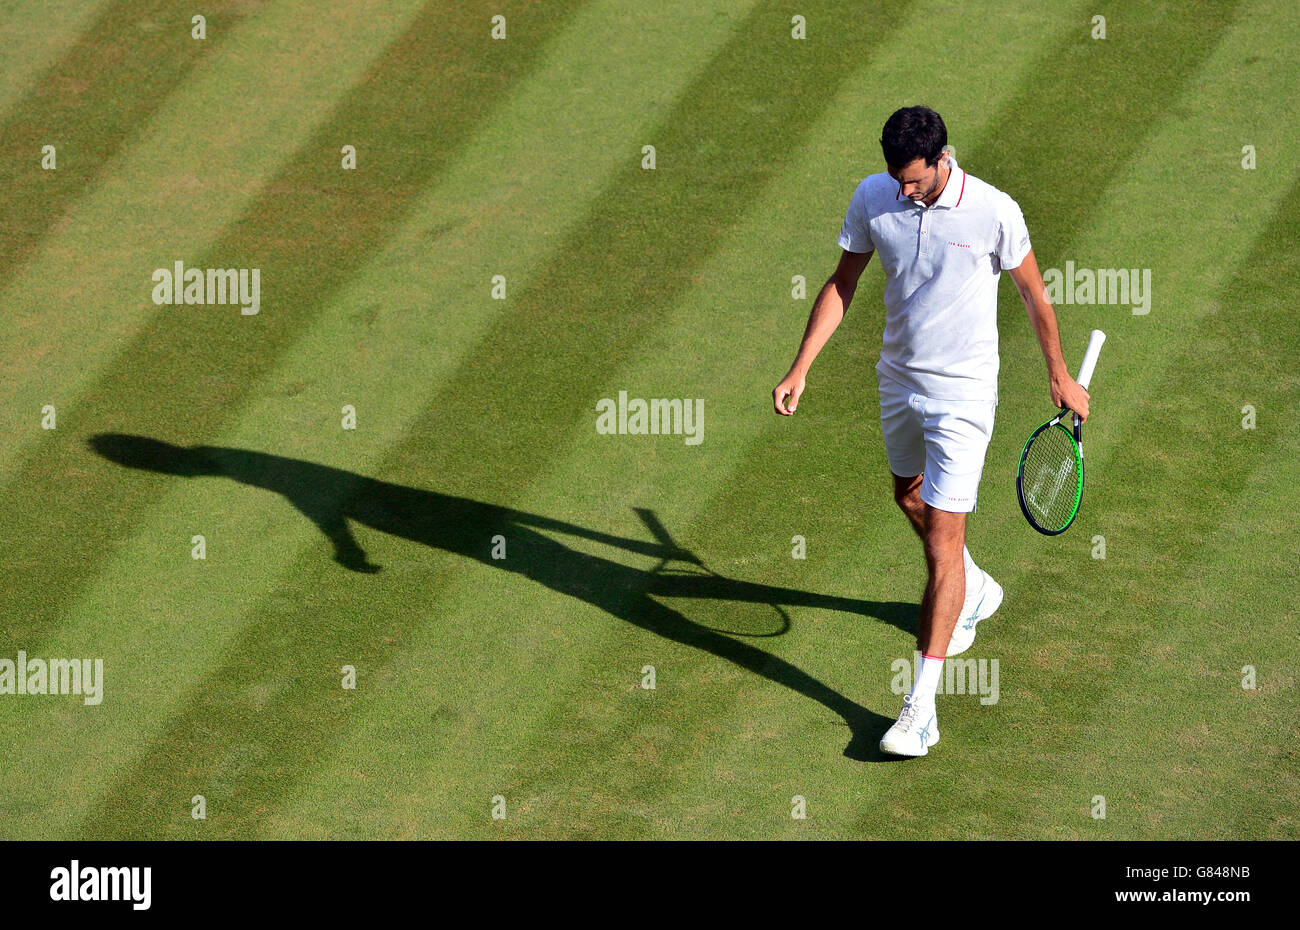 James Ward during his match against Vasek Pospisil during day Six of the Wimbledon Championships at the All England Lawn Tennis and Croquet Club, Wimbledon. Stock Photo